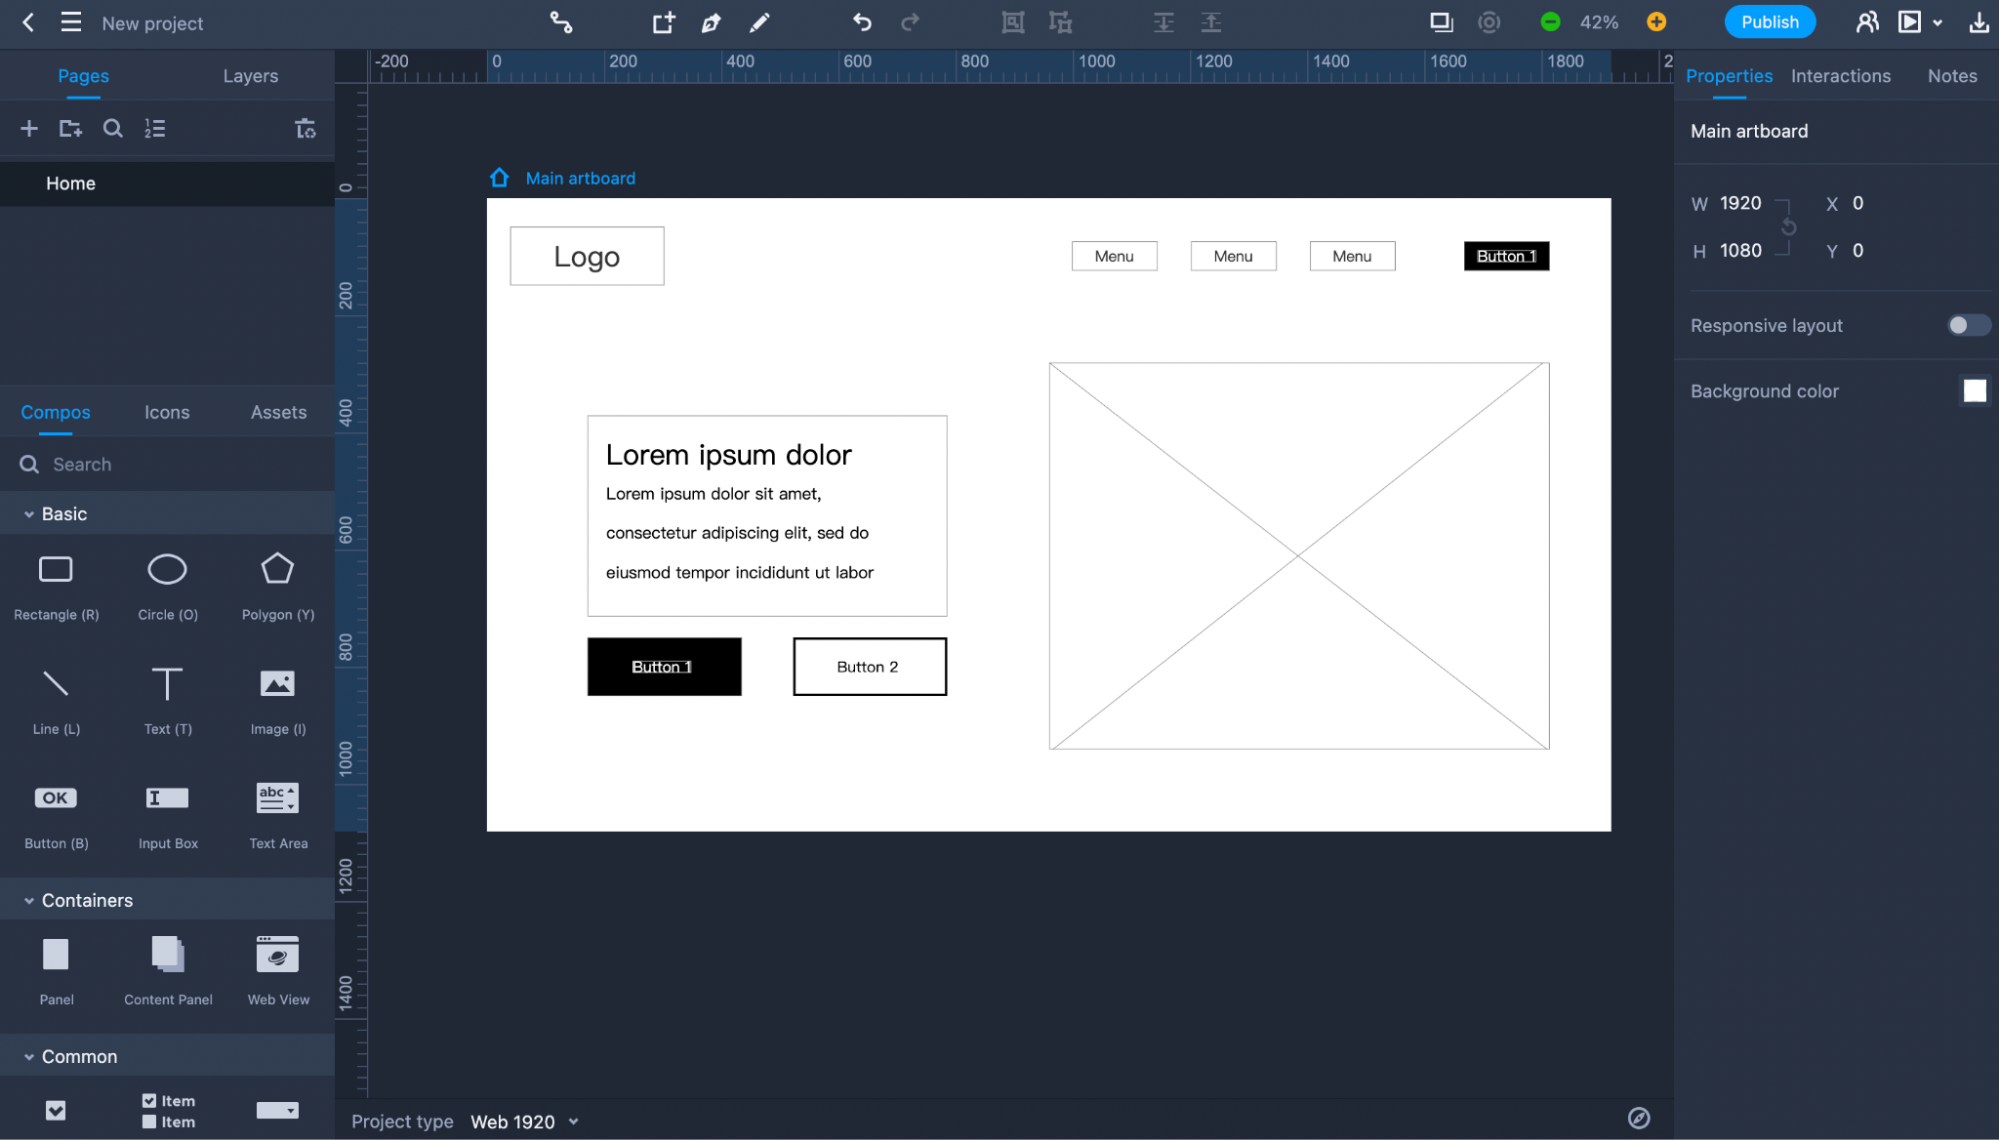 Adding contextual details on wireframe